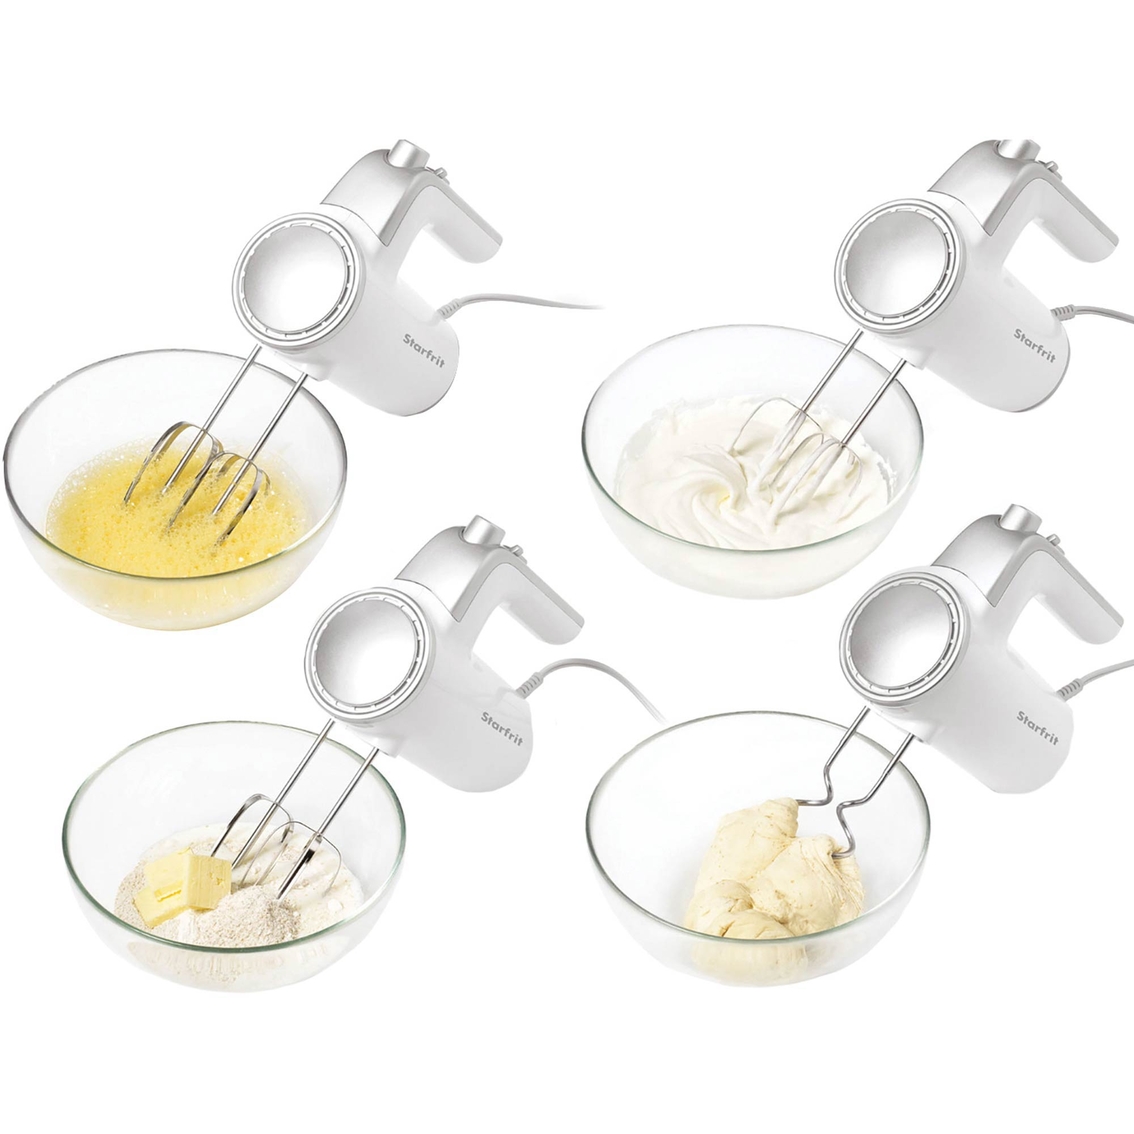 Starfrit 6 Speed 250W Electric Hand Mixer - Image 4 of 5